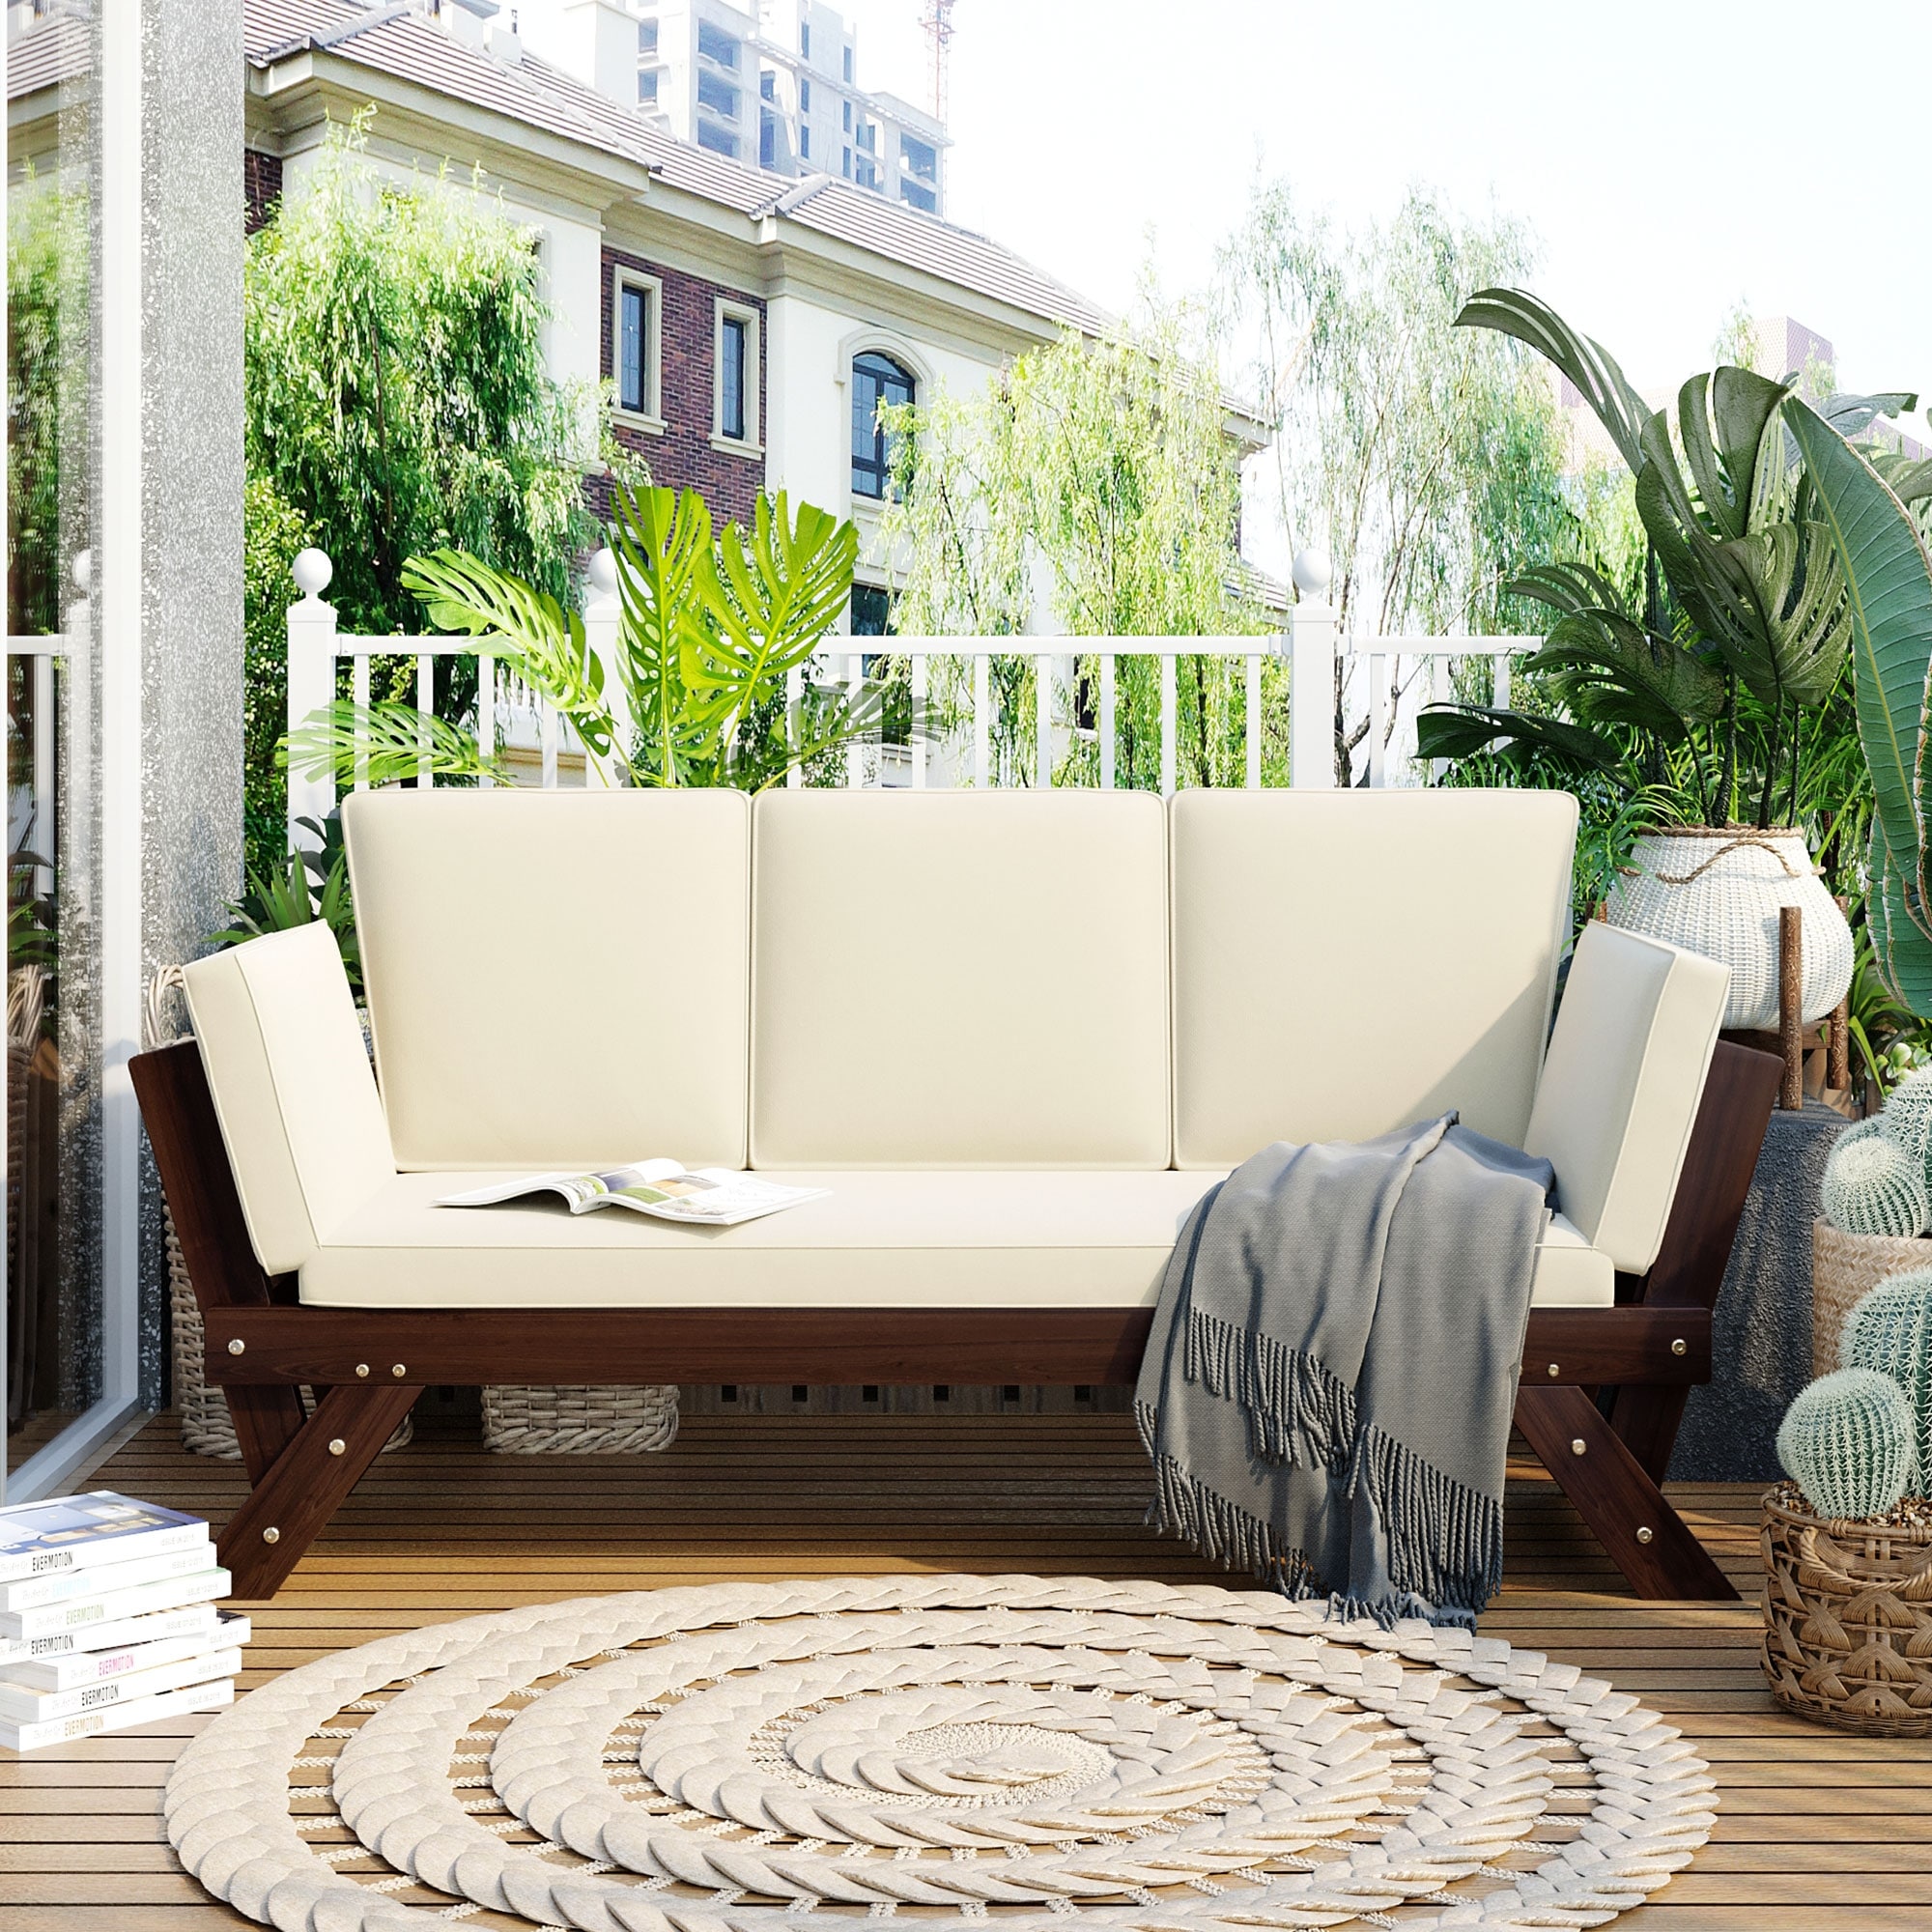 Outdoor Adjustable Patio Wooden Daybed Sofa Chaise Lounge With Cushions For Small Places  Brown Finish+ Cushion